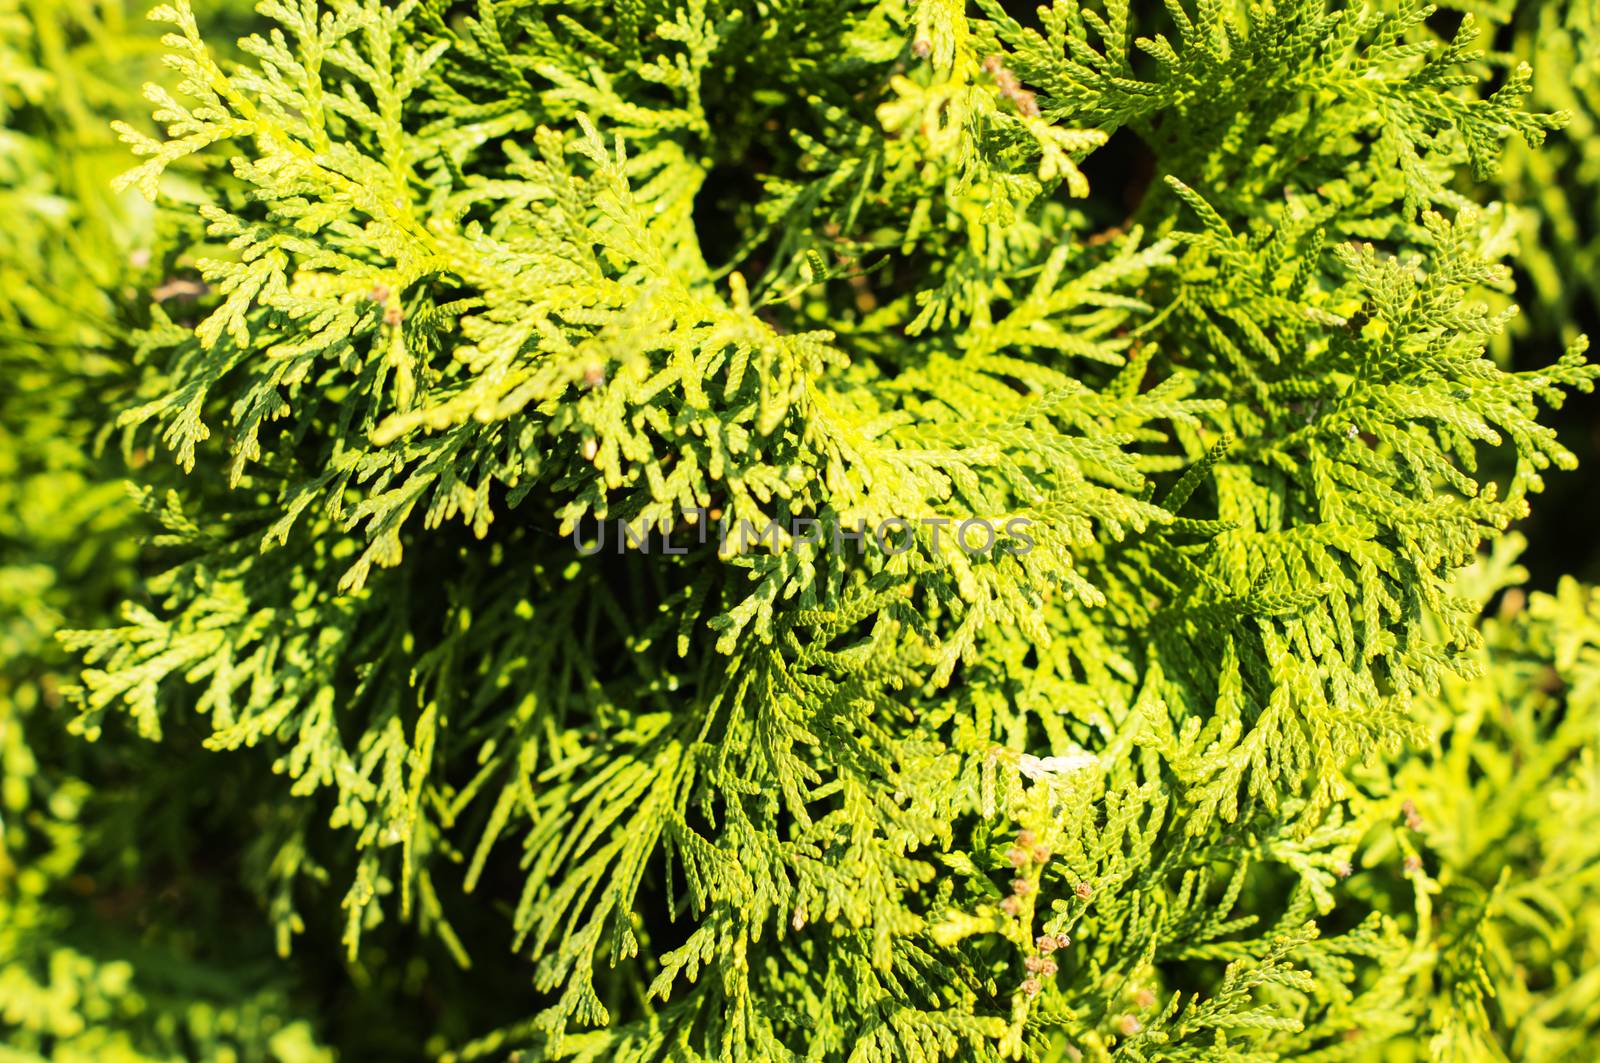 Thuja hedge close-up view.. For your commercial and editorial use by serhii_lohvyniuk